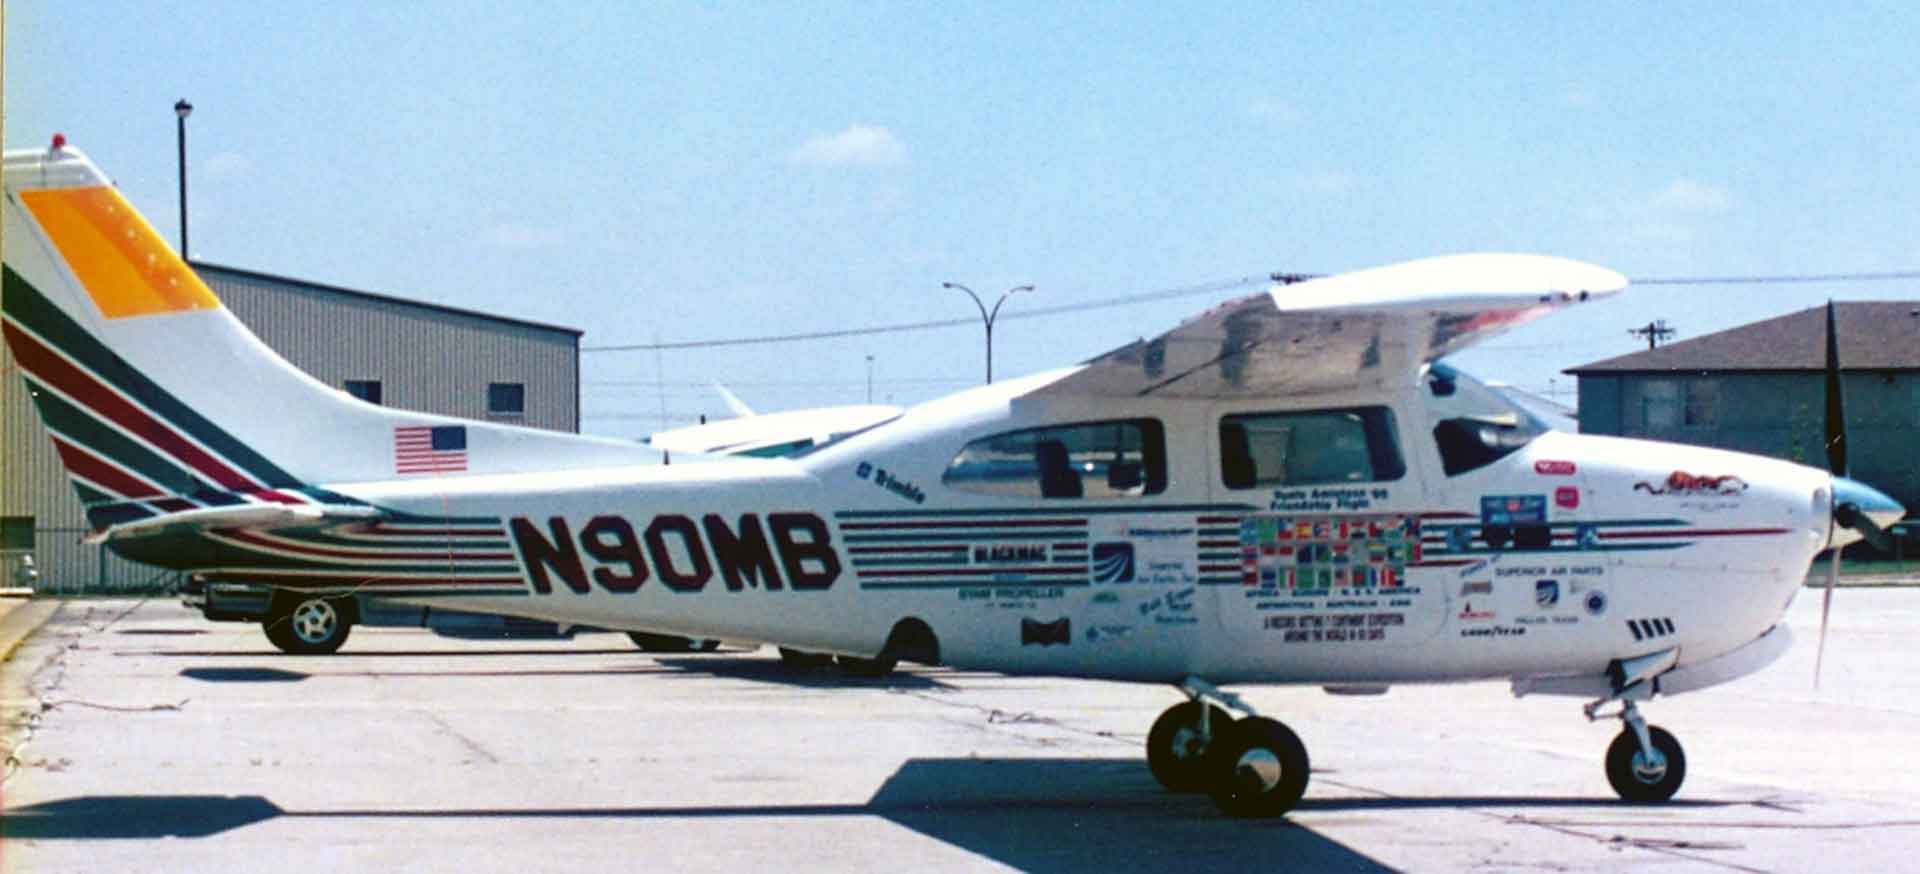 Cessna N90MB parked from side